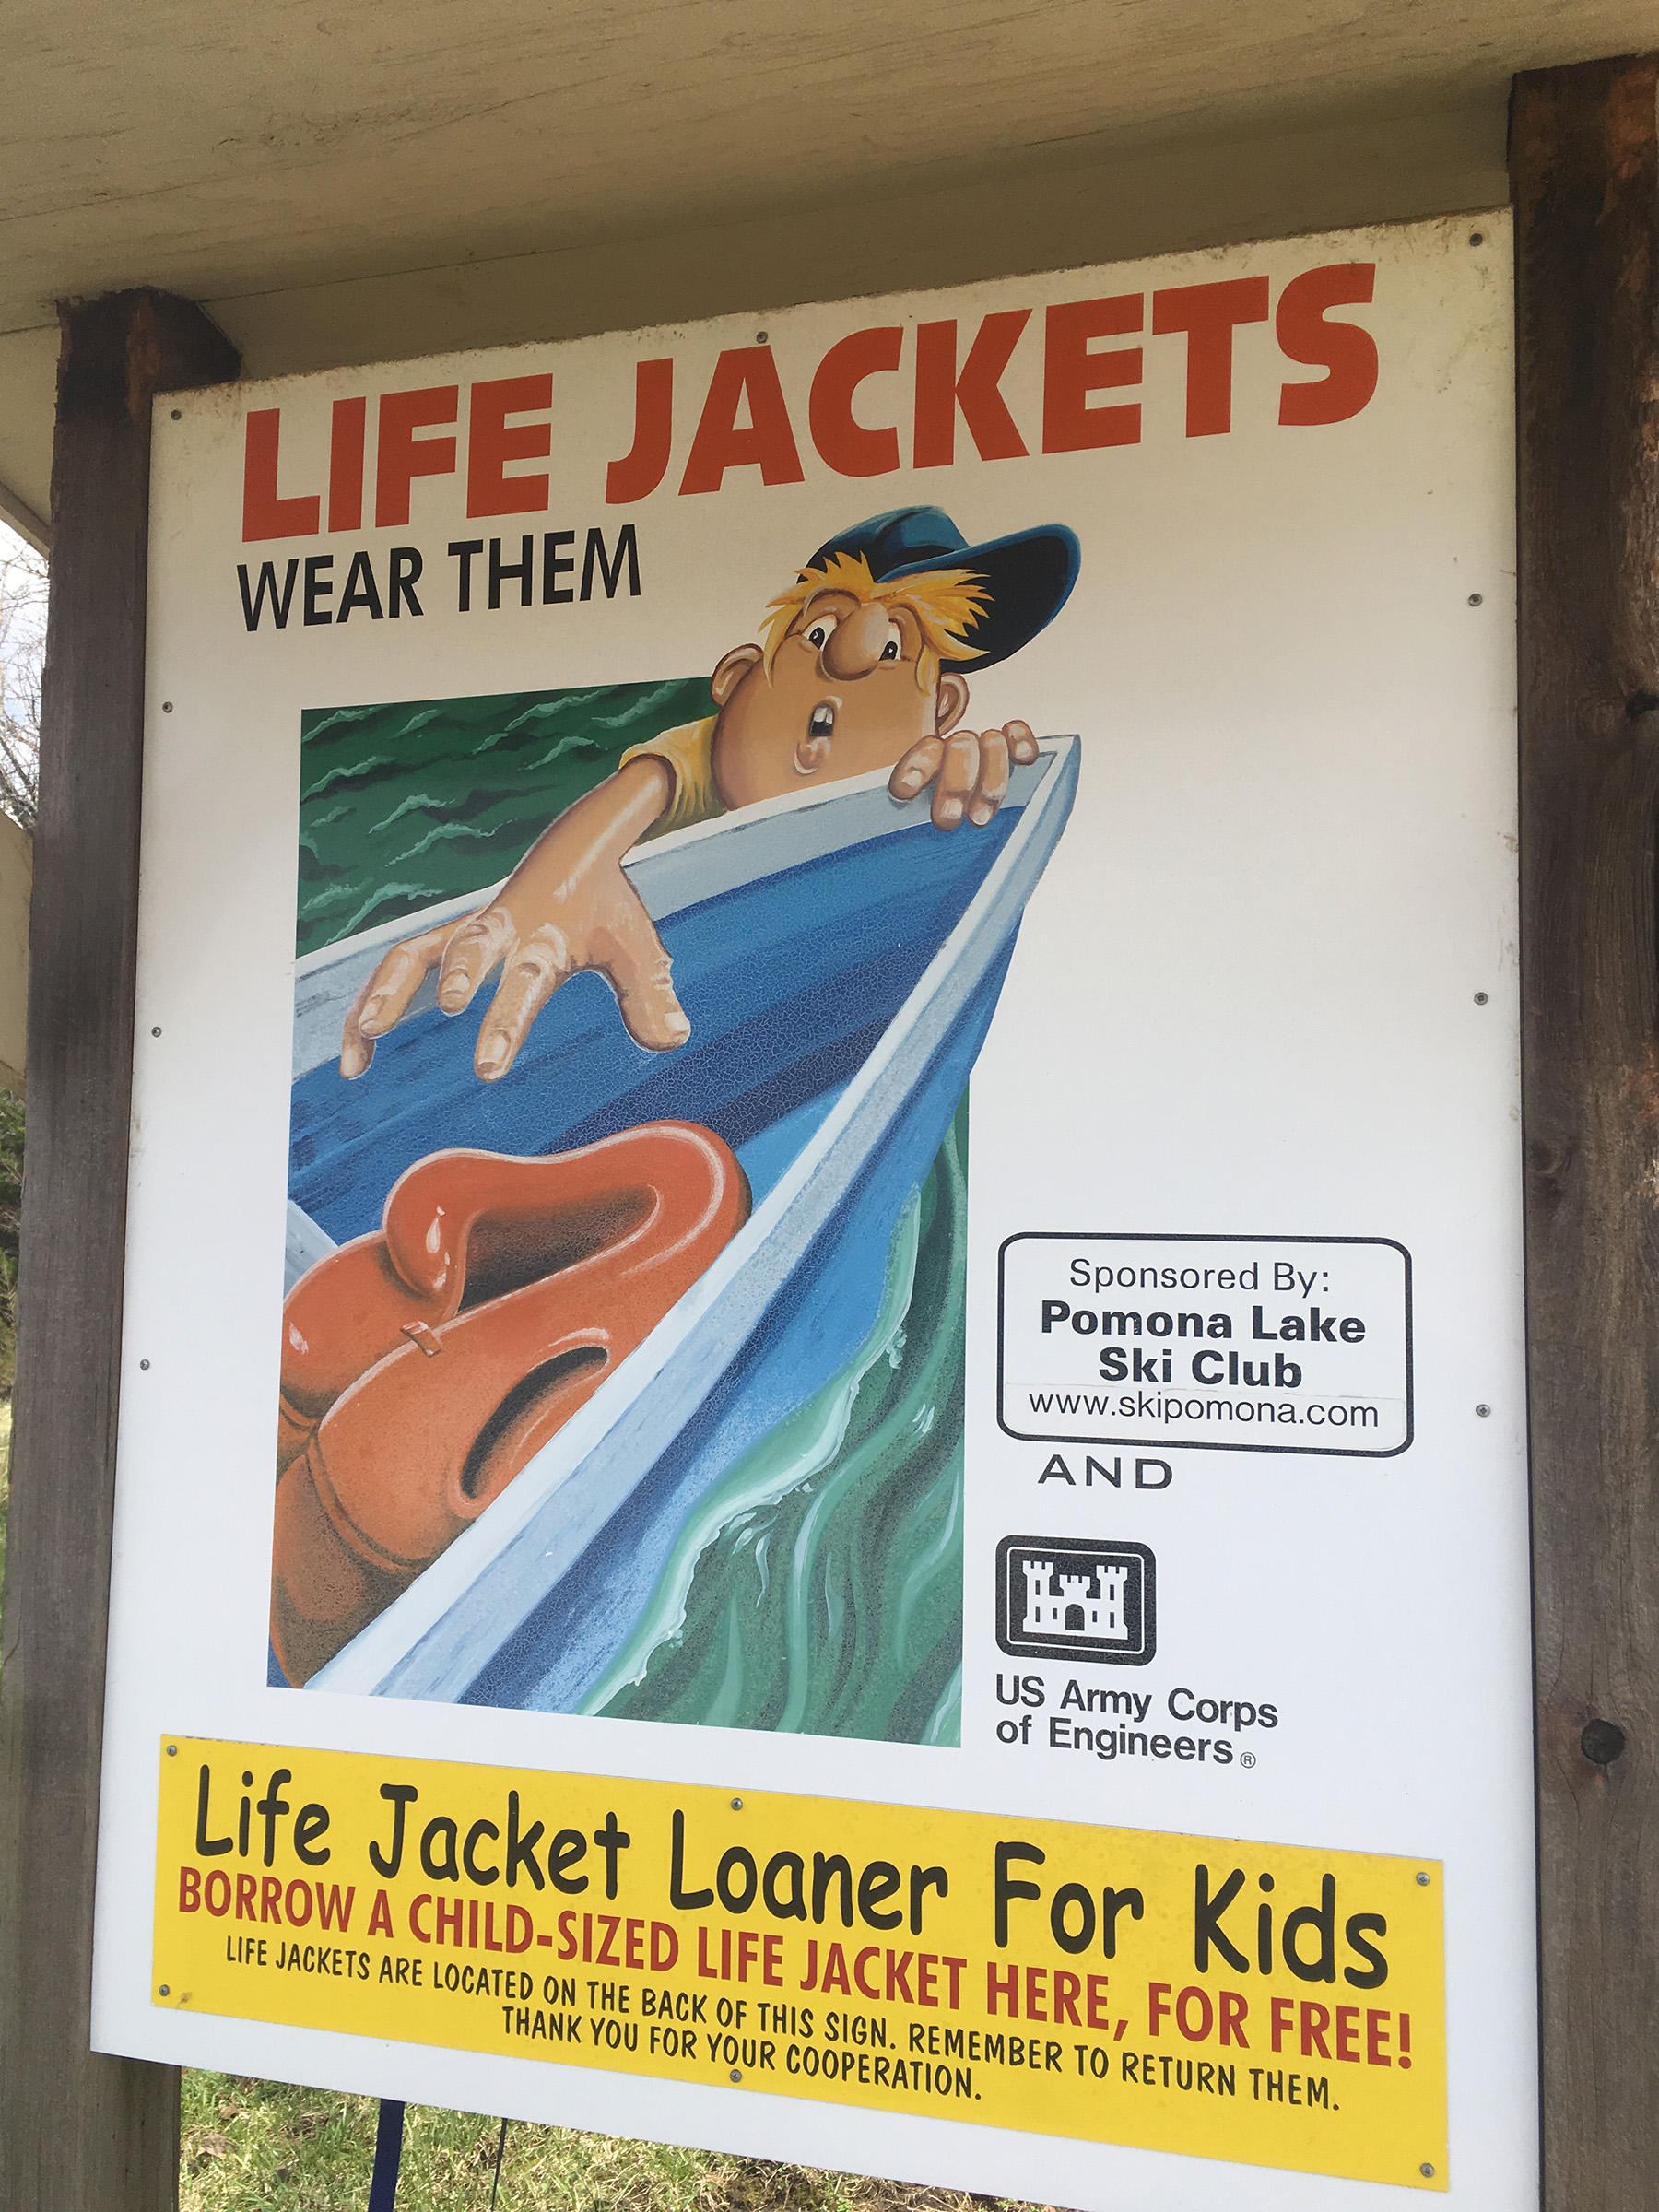 Make sure the kids have  a properly fitted life jacket.